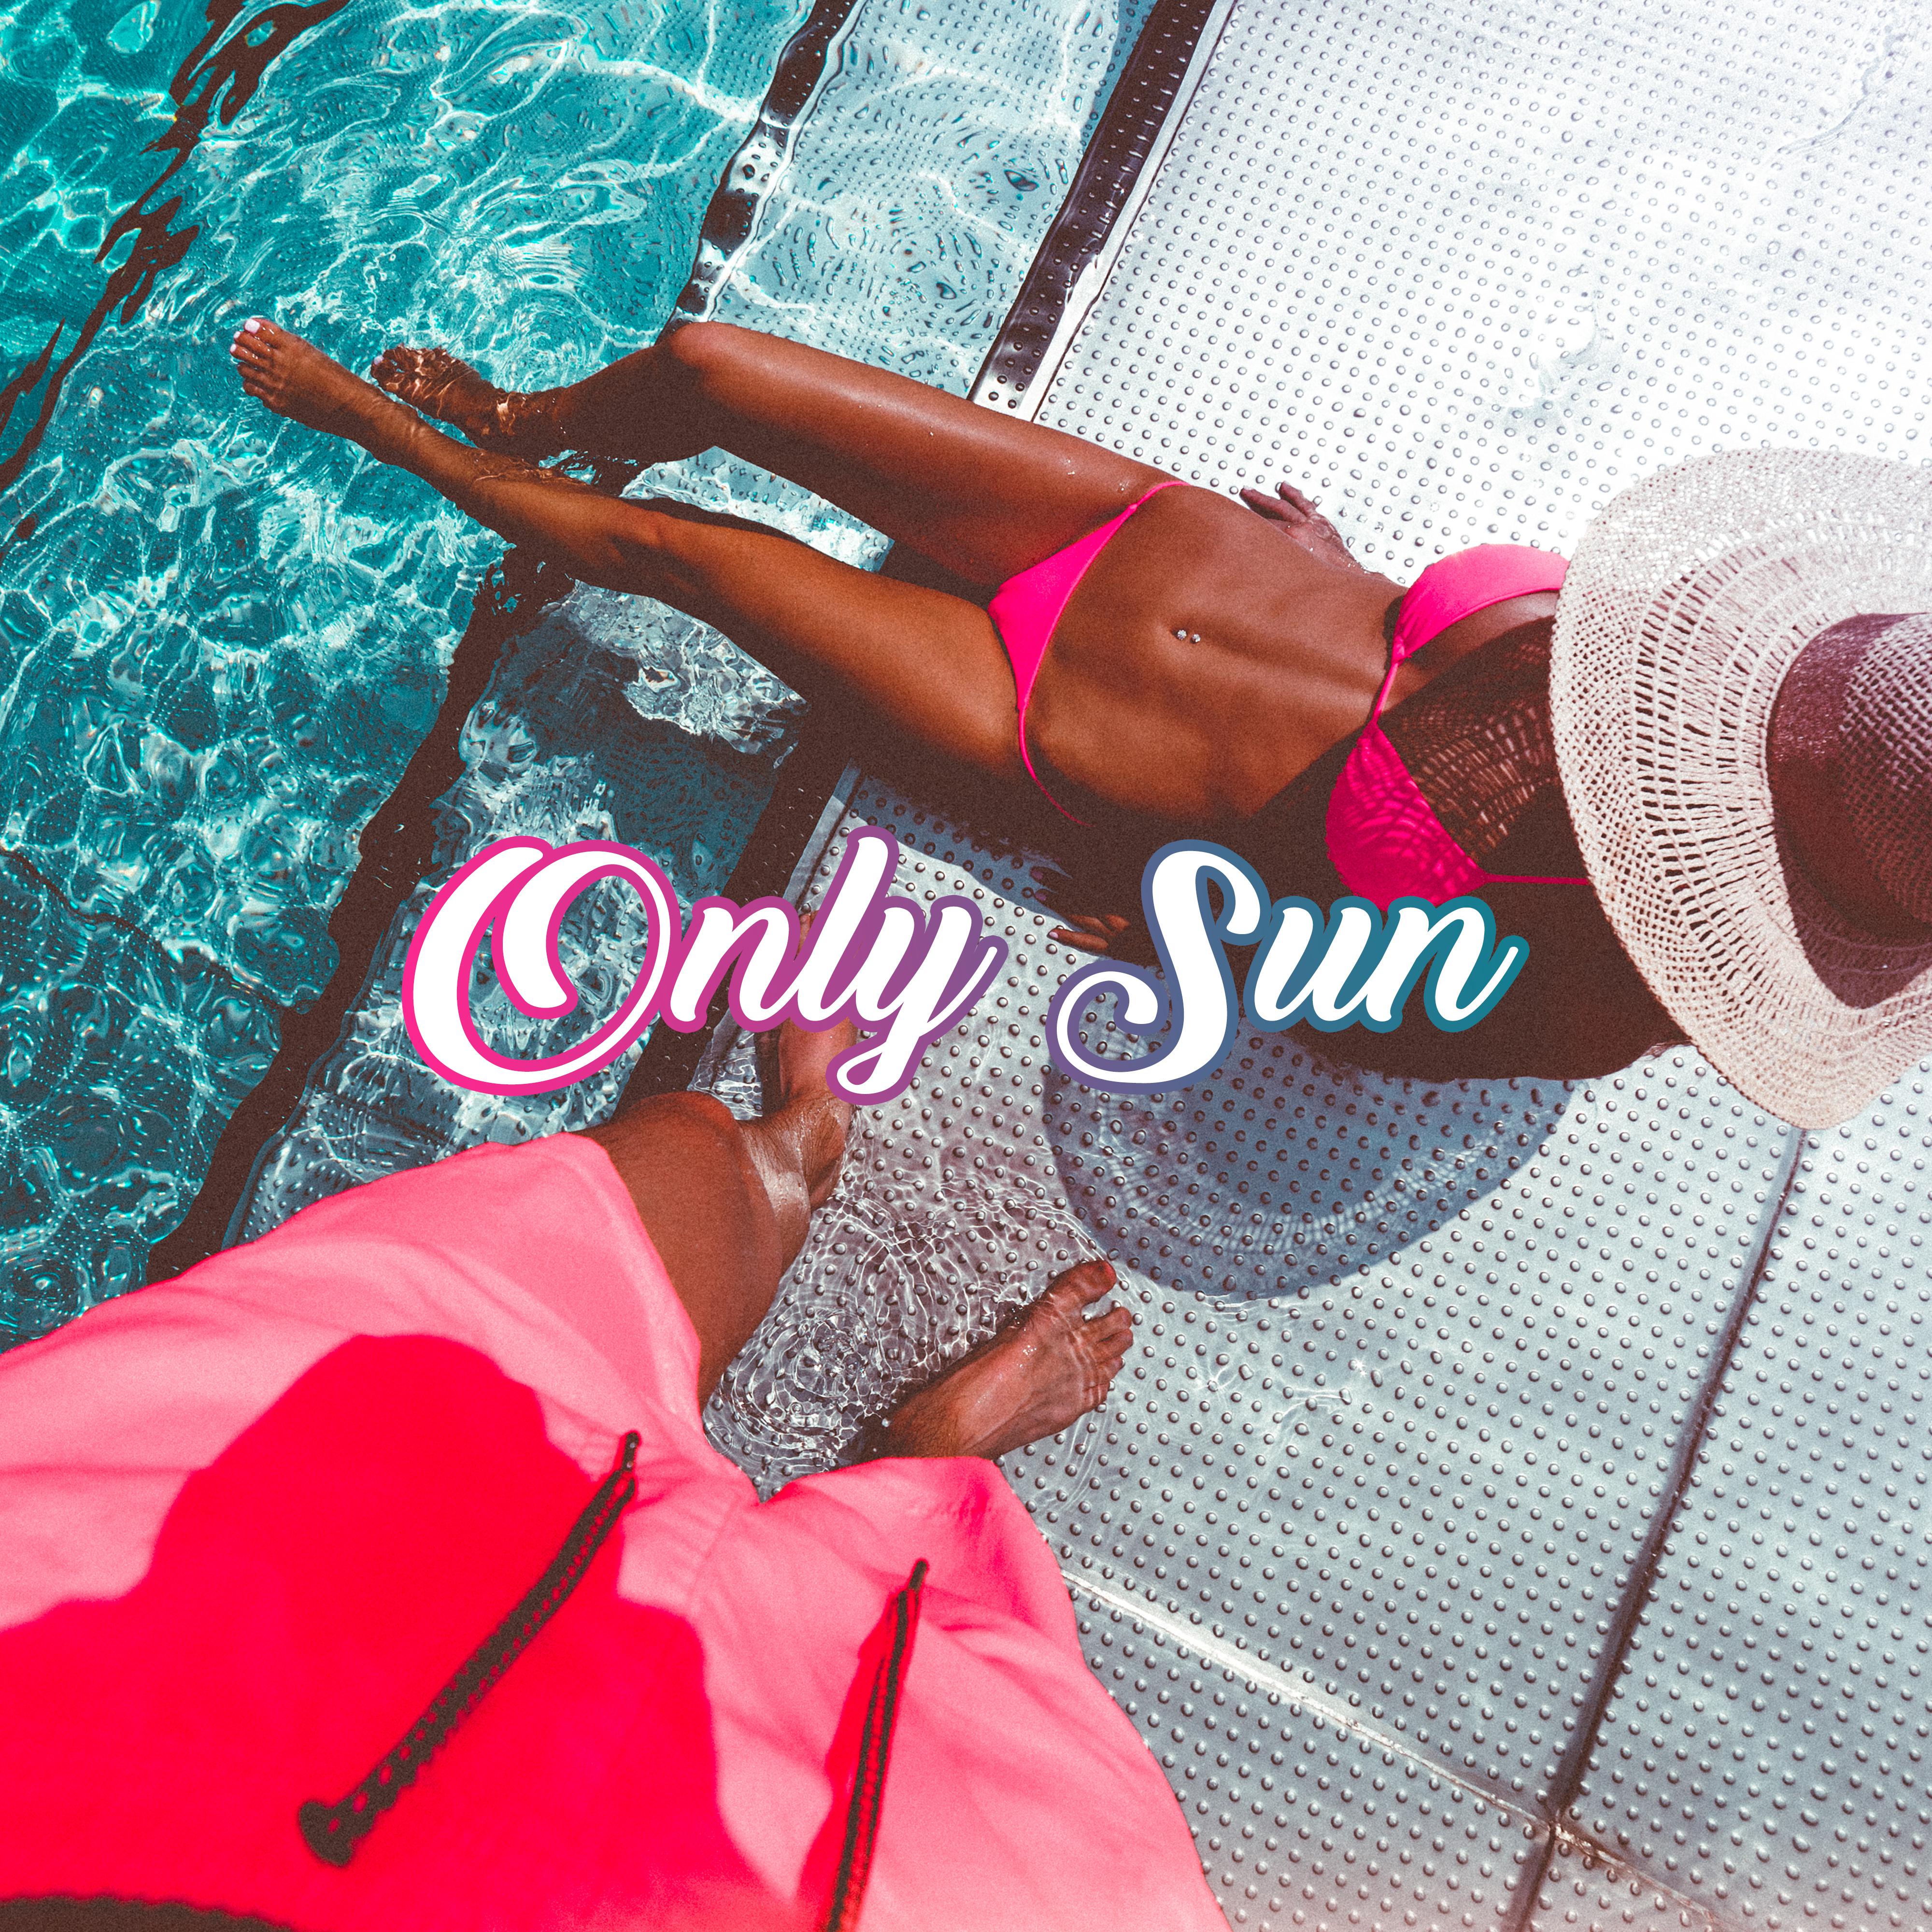 Only Sun: Summer Chill Out 2019, Relax, Lounge, Summer Dreams, Ibiza Chill, Tropical Music